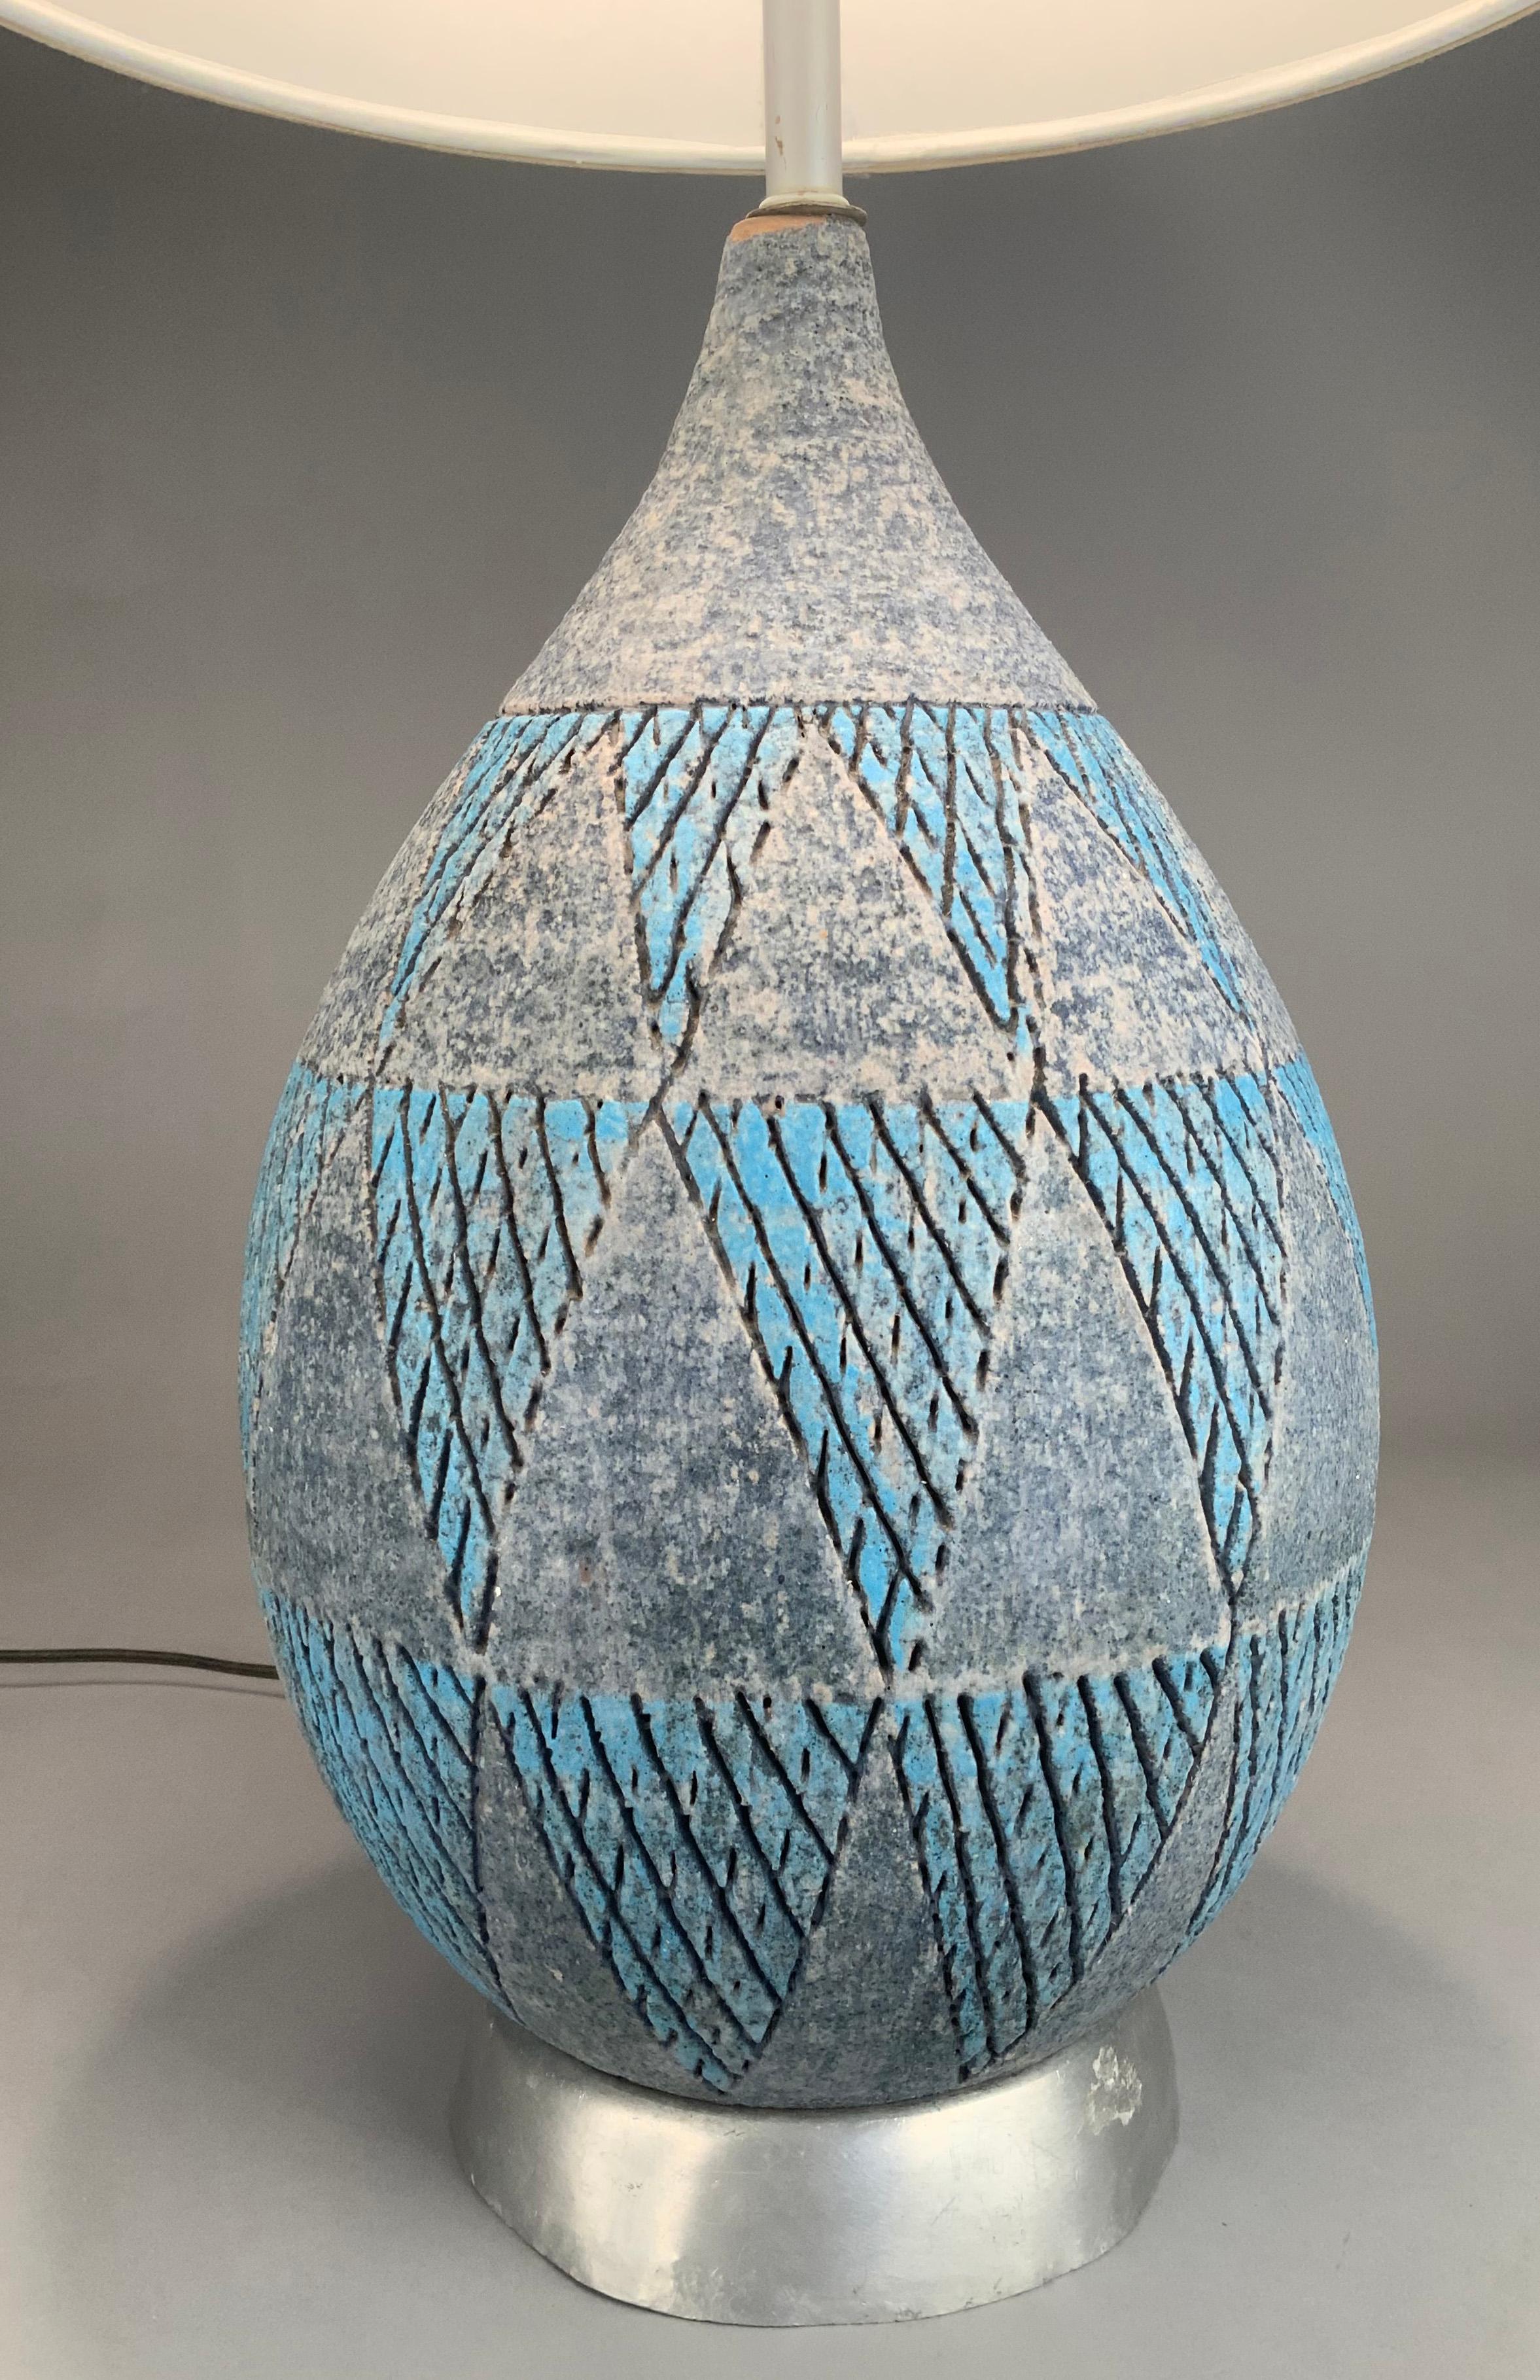 A beautiful vintage 1950's Italian glazed ceramic lamp by Bitossi. in a subtle gourd shape with a large base and tapered neck, the lamp is incised with a repeating triangle pattern, with cross hatching, and glazed in shades of blue and grey. Marked